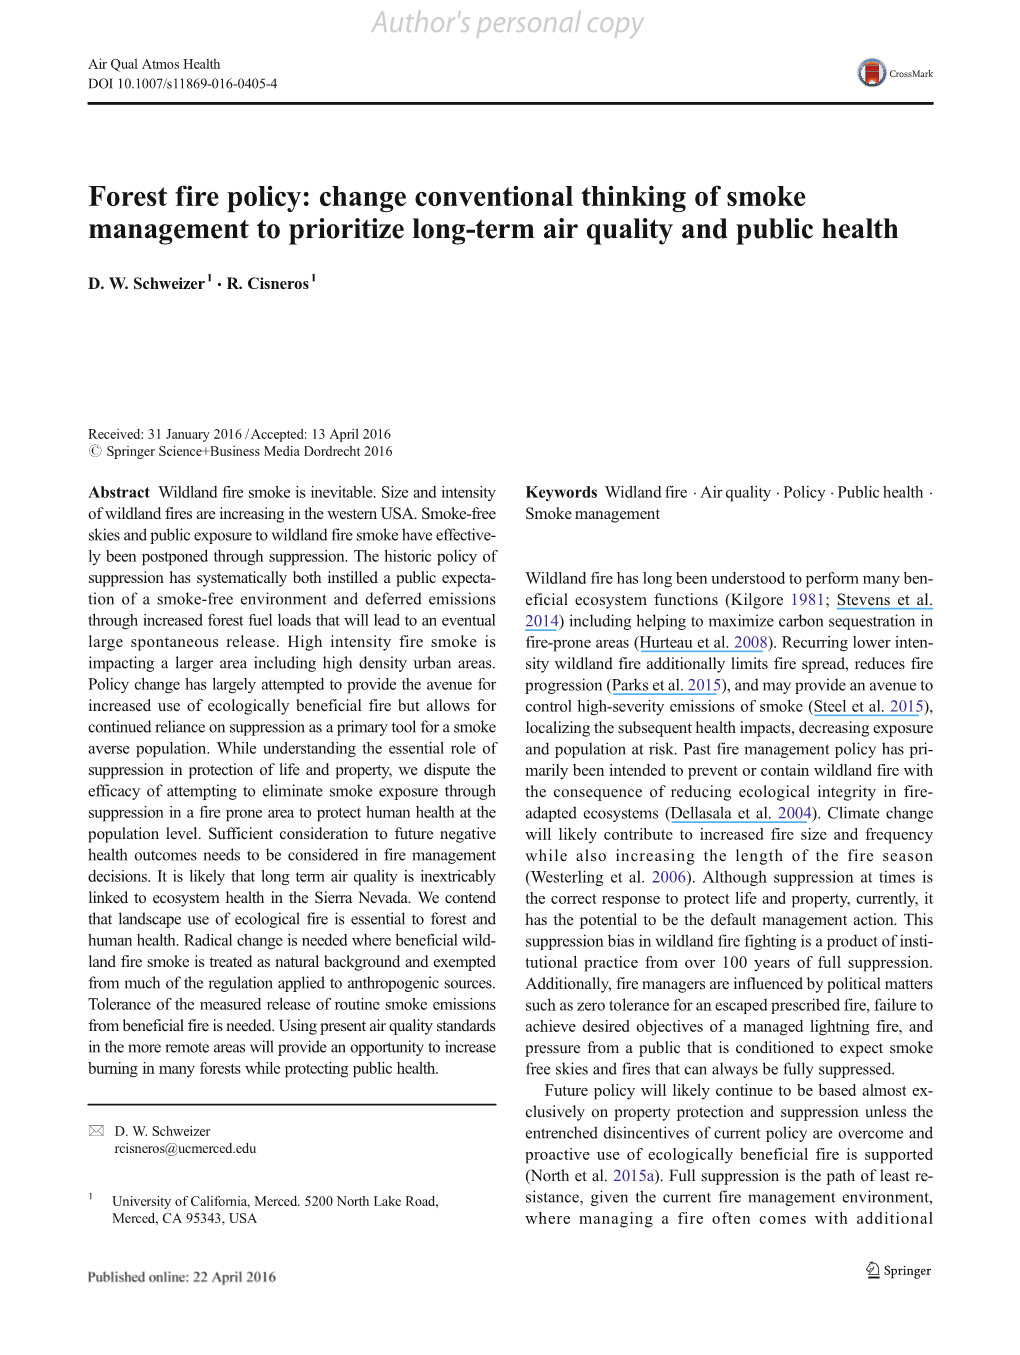 Forest Fire Policy: Change Conventional Thinking of Smoke Management to Prioritize Long-Term Air Quality and Public Health